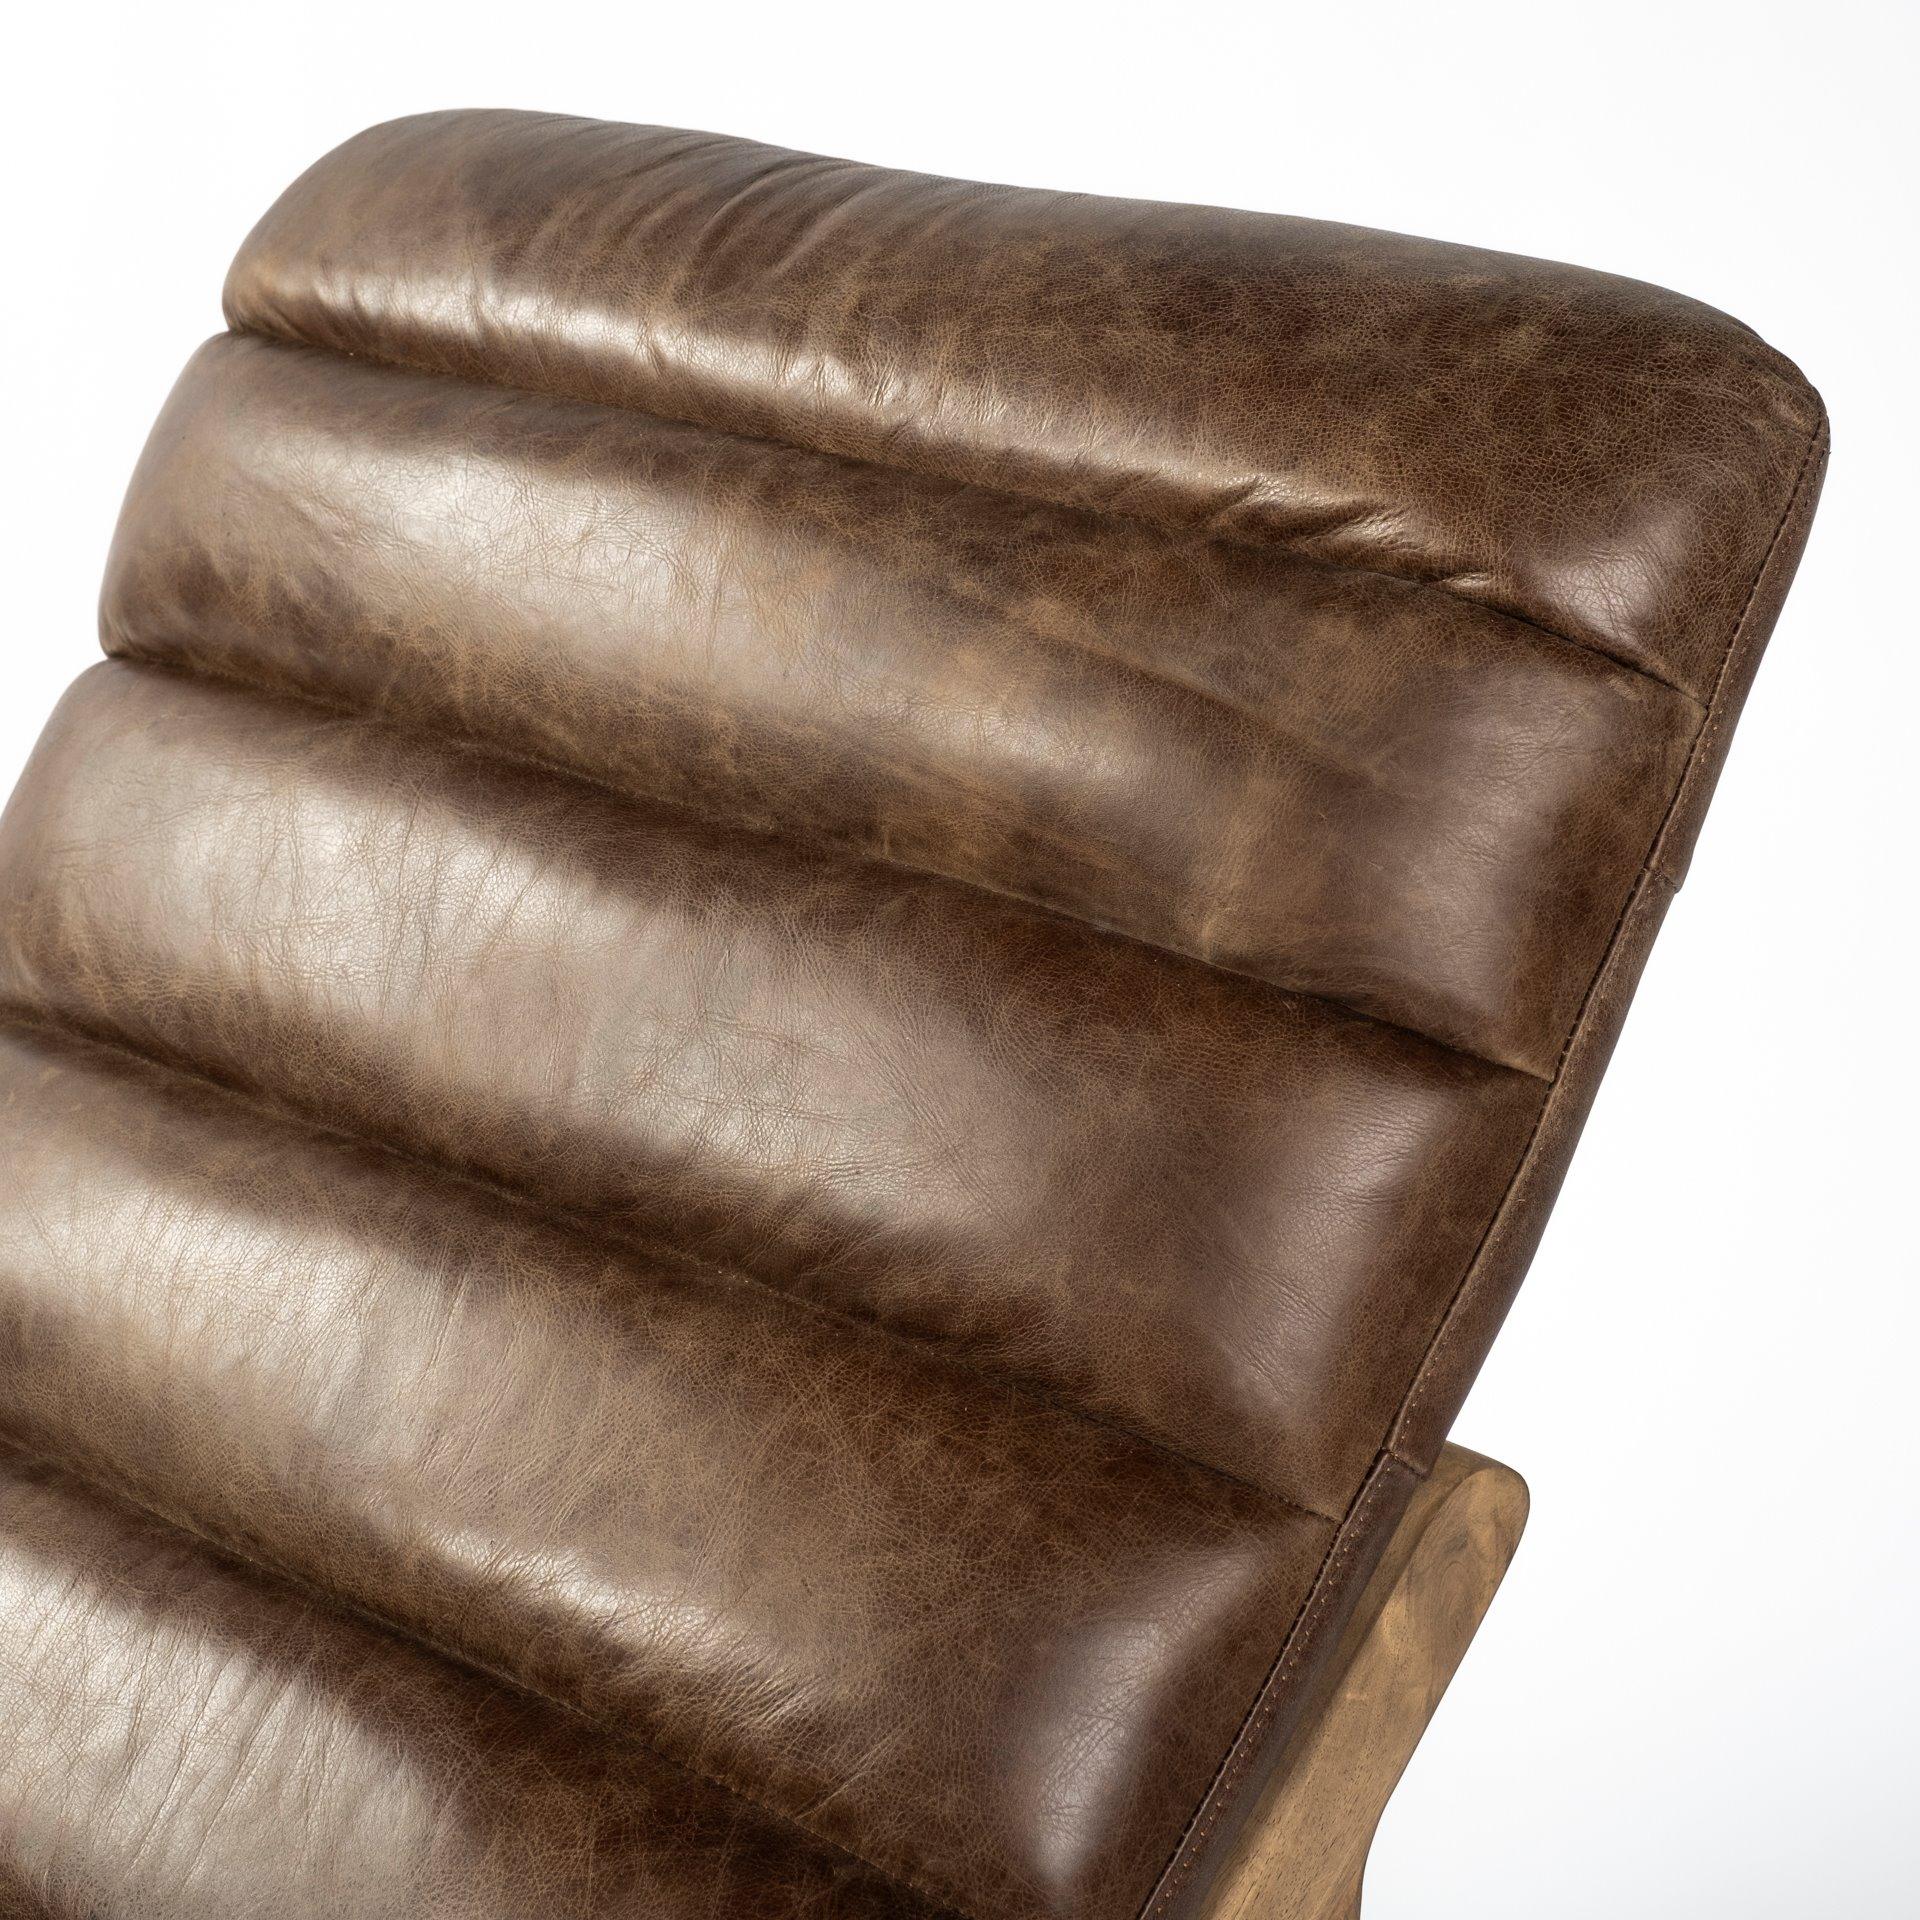 Modern Brown Genuine Leather Chaise Lounge Chair With Solid Wood Frame And Base